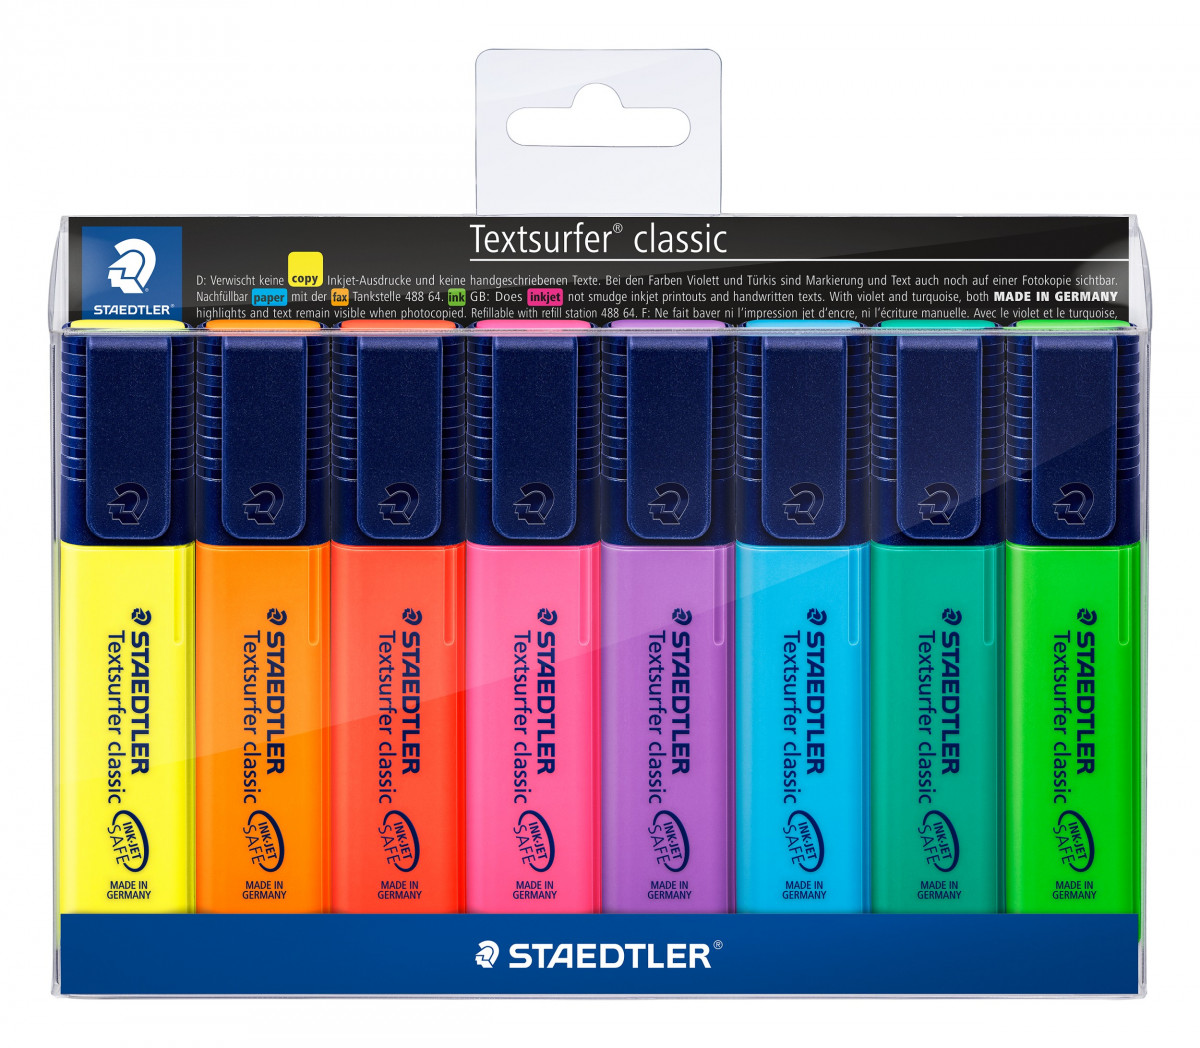 Staedtler Textsurfer Classic Highlighter - Assorted Colours (Wallet of 8)